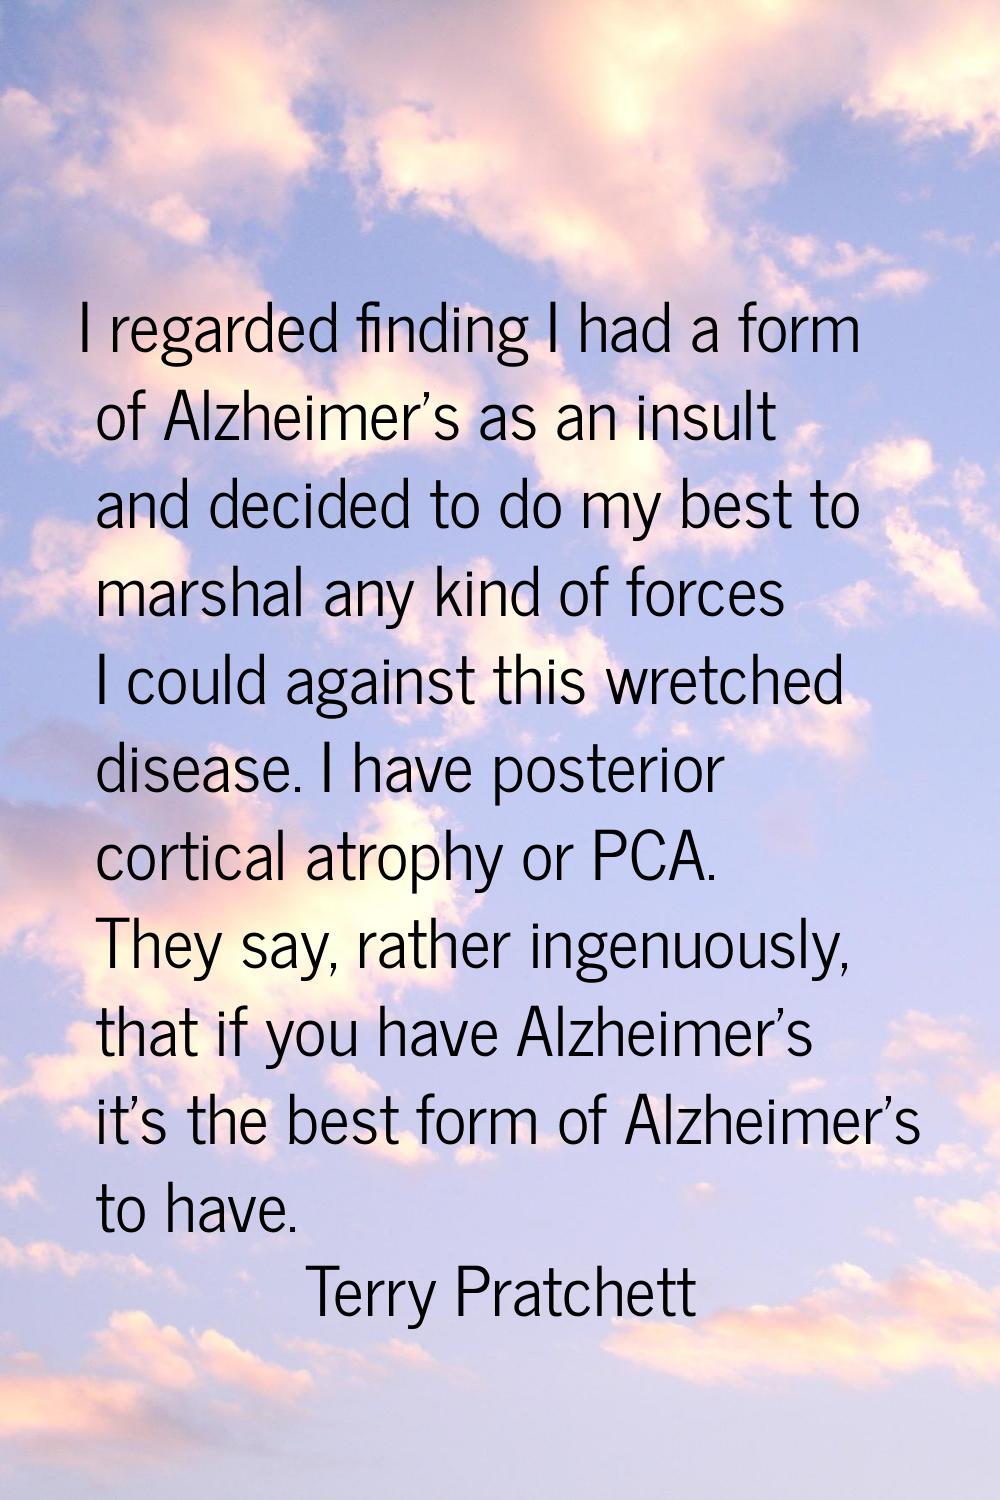 I regarded finding I had a form of Alzheimer's as an insult and decided to do my best to marshal an